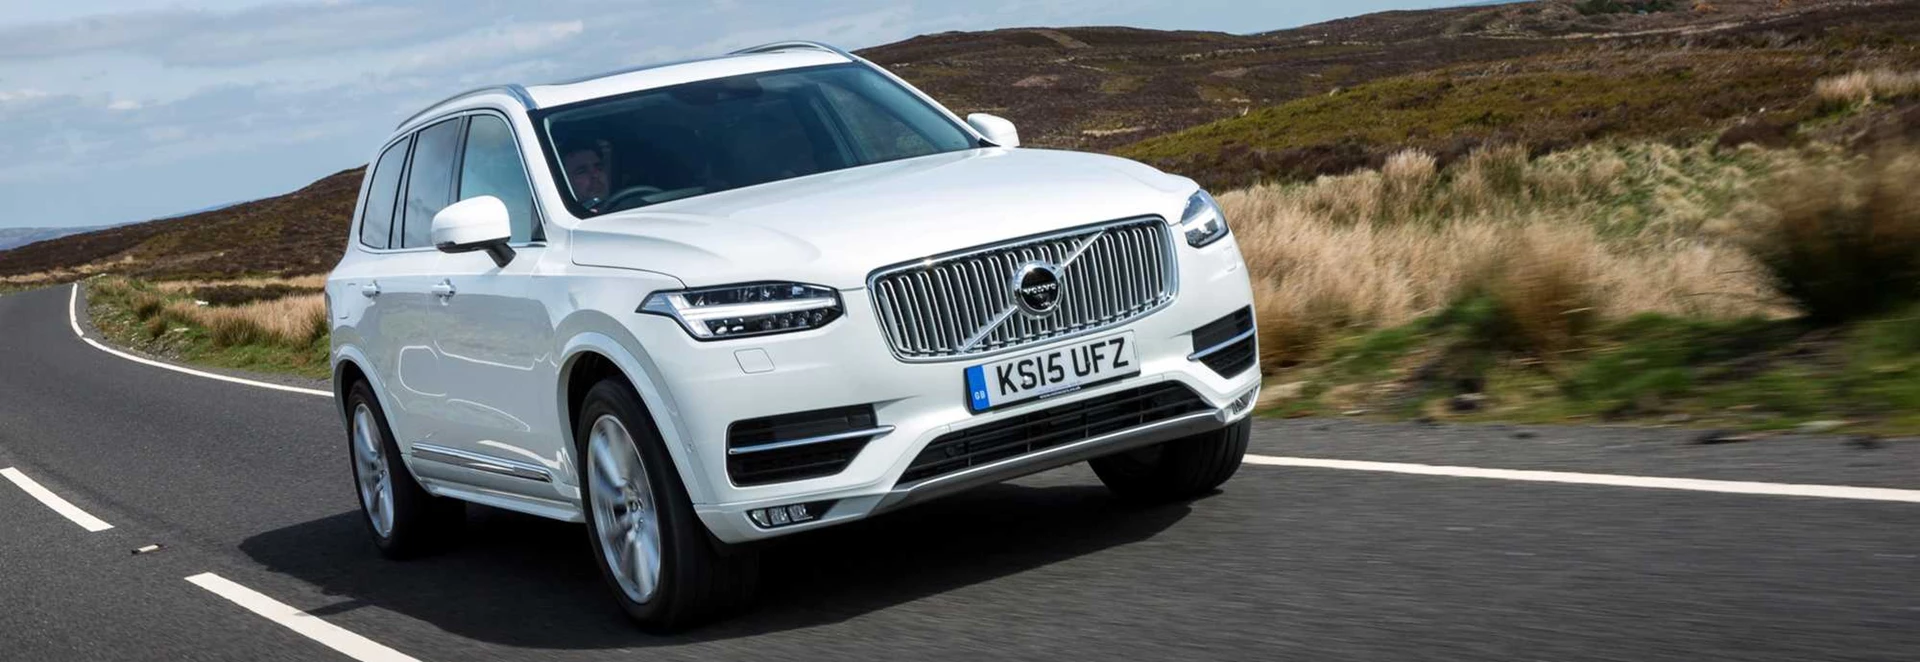 Volvo XC90 SUV review 